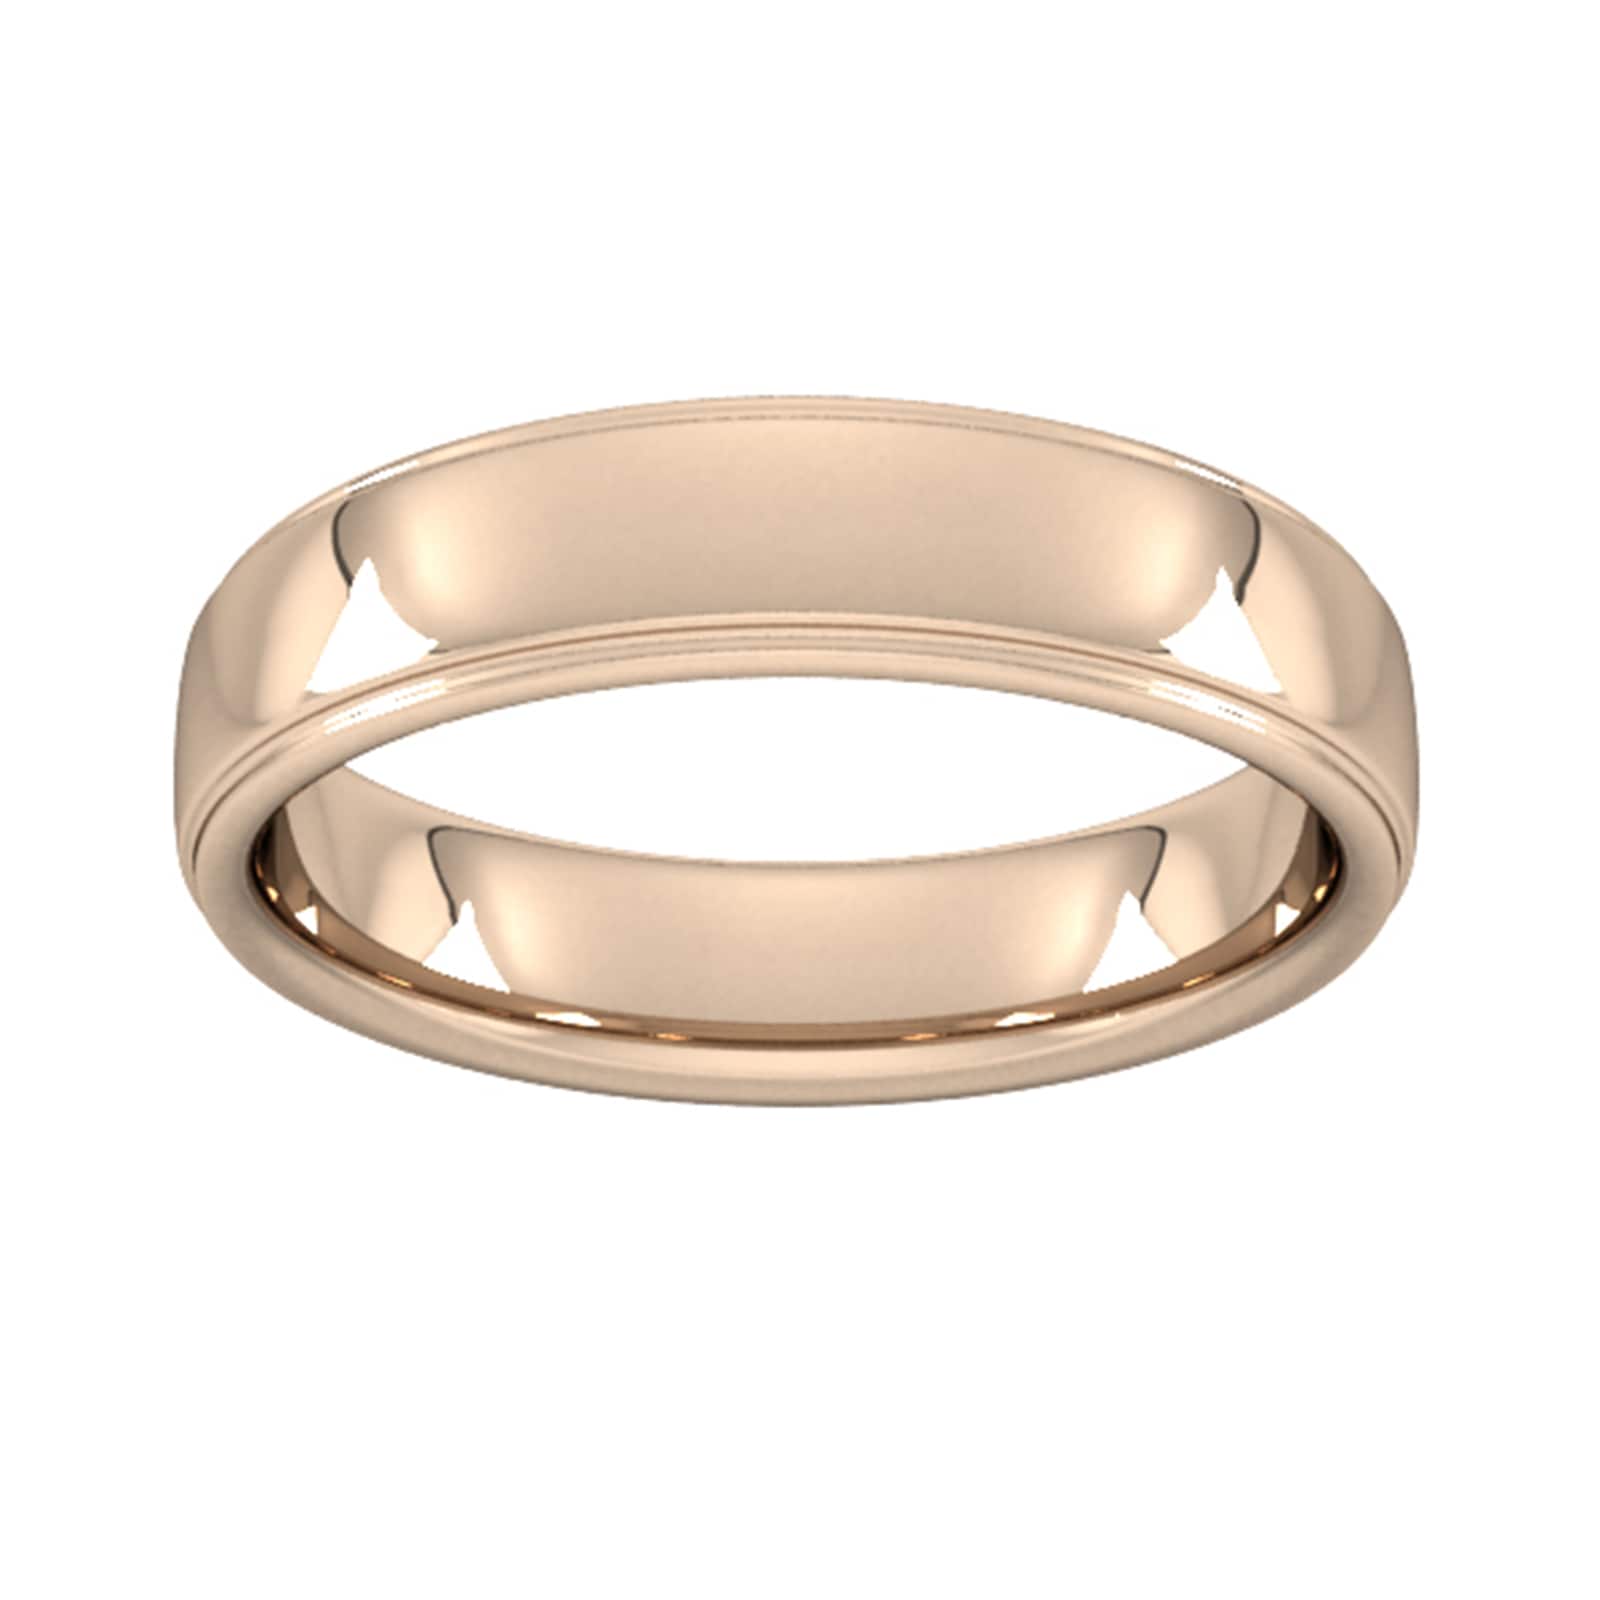 5mm Slight Court Standard Polished Finish With Grooves Wedding Ring In 9 Carat Rose Gold - Ring Size Z